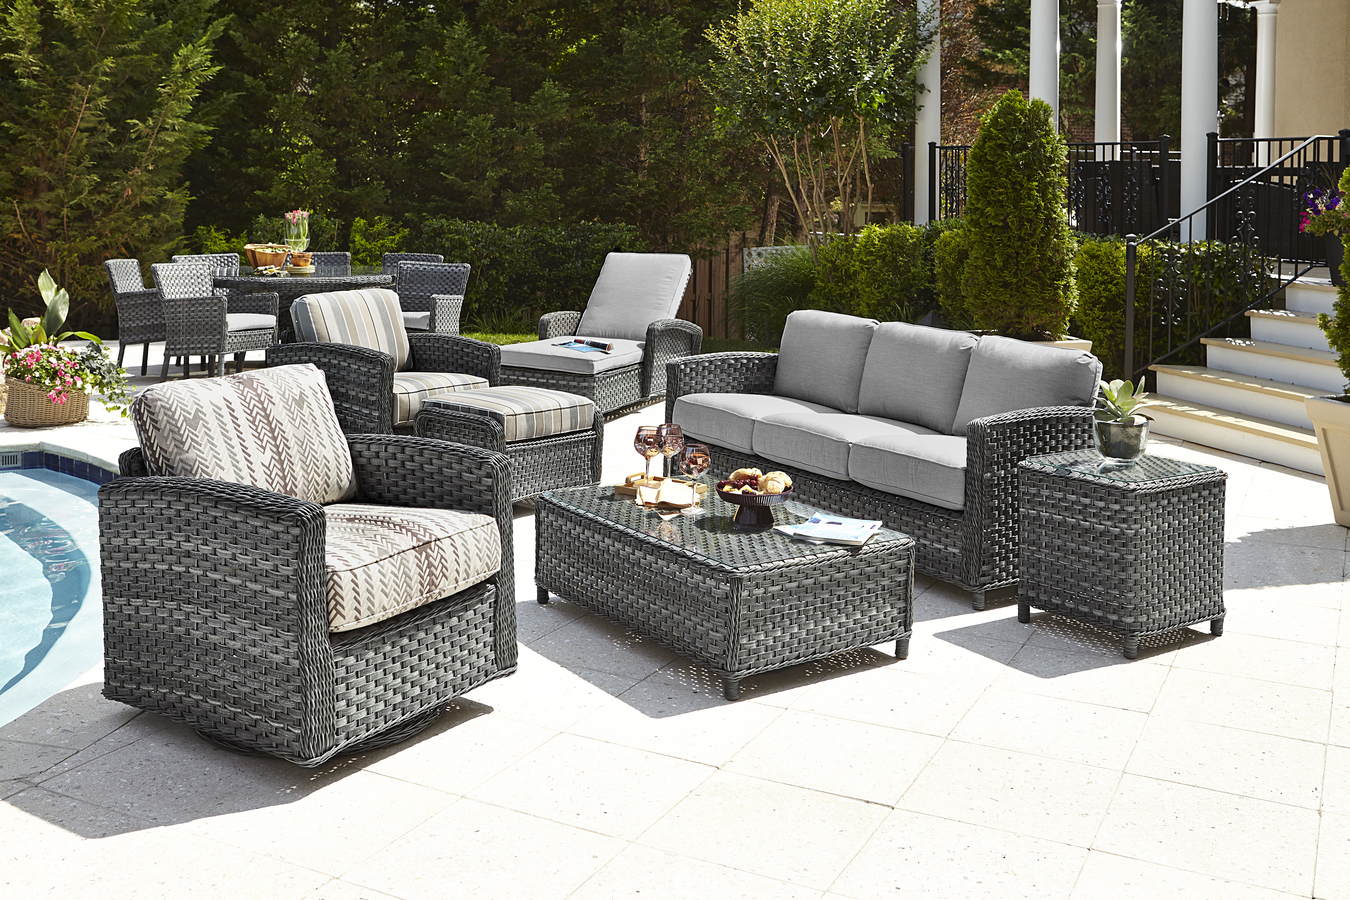 Brilliant Woven Resin Wicker Patio Furniture Exclusive with regard to size 1350 X 900